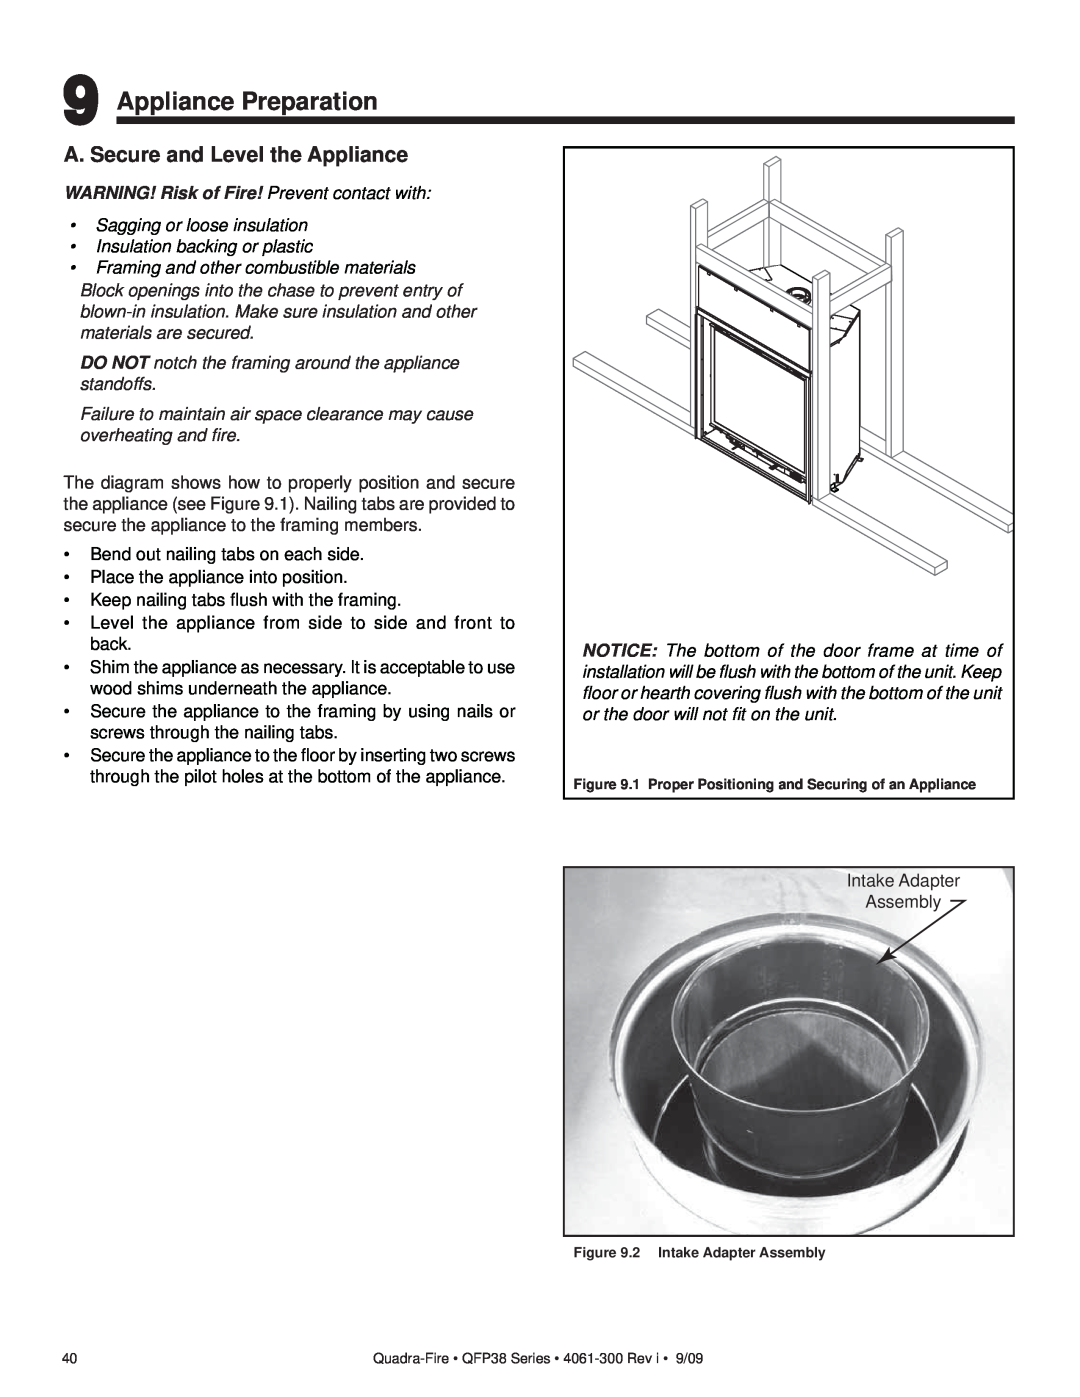 Quadra-Fire QFP38-NG Appliance Preparation, A. Secure and Level the Appliance, WARNING! Risk of Fire! Prevent contact with 